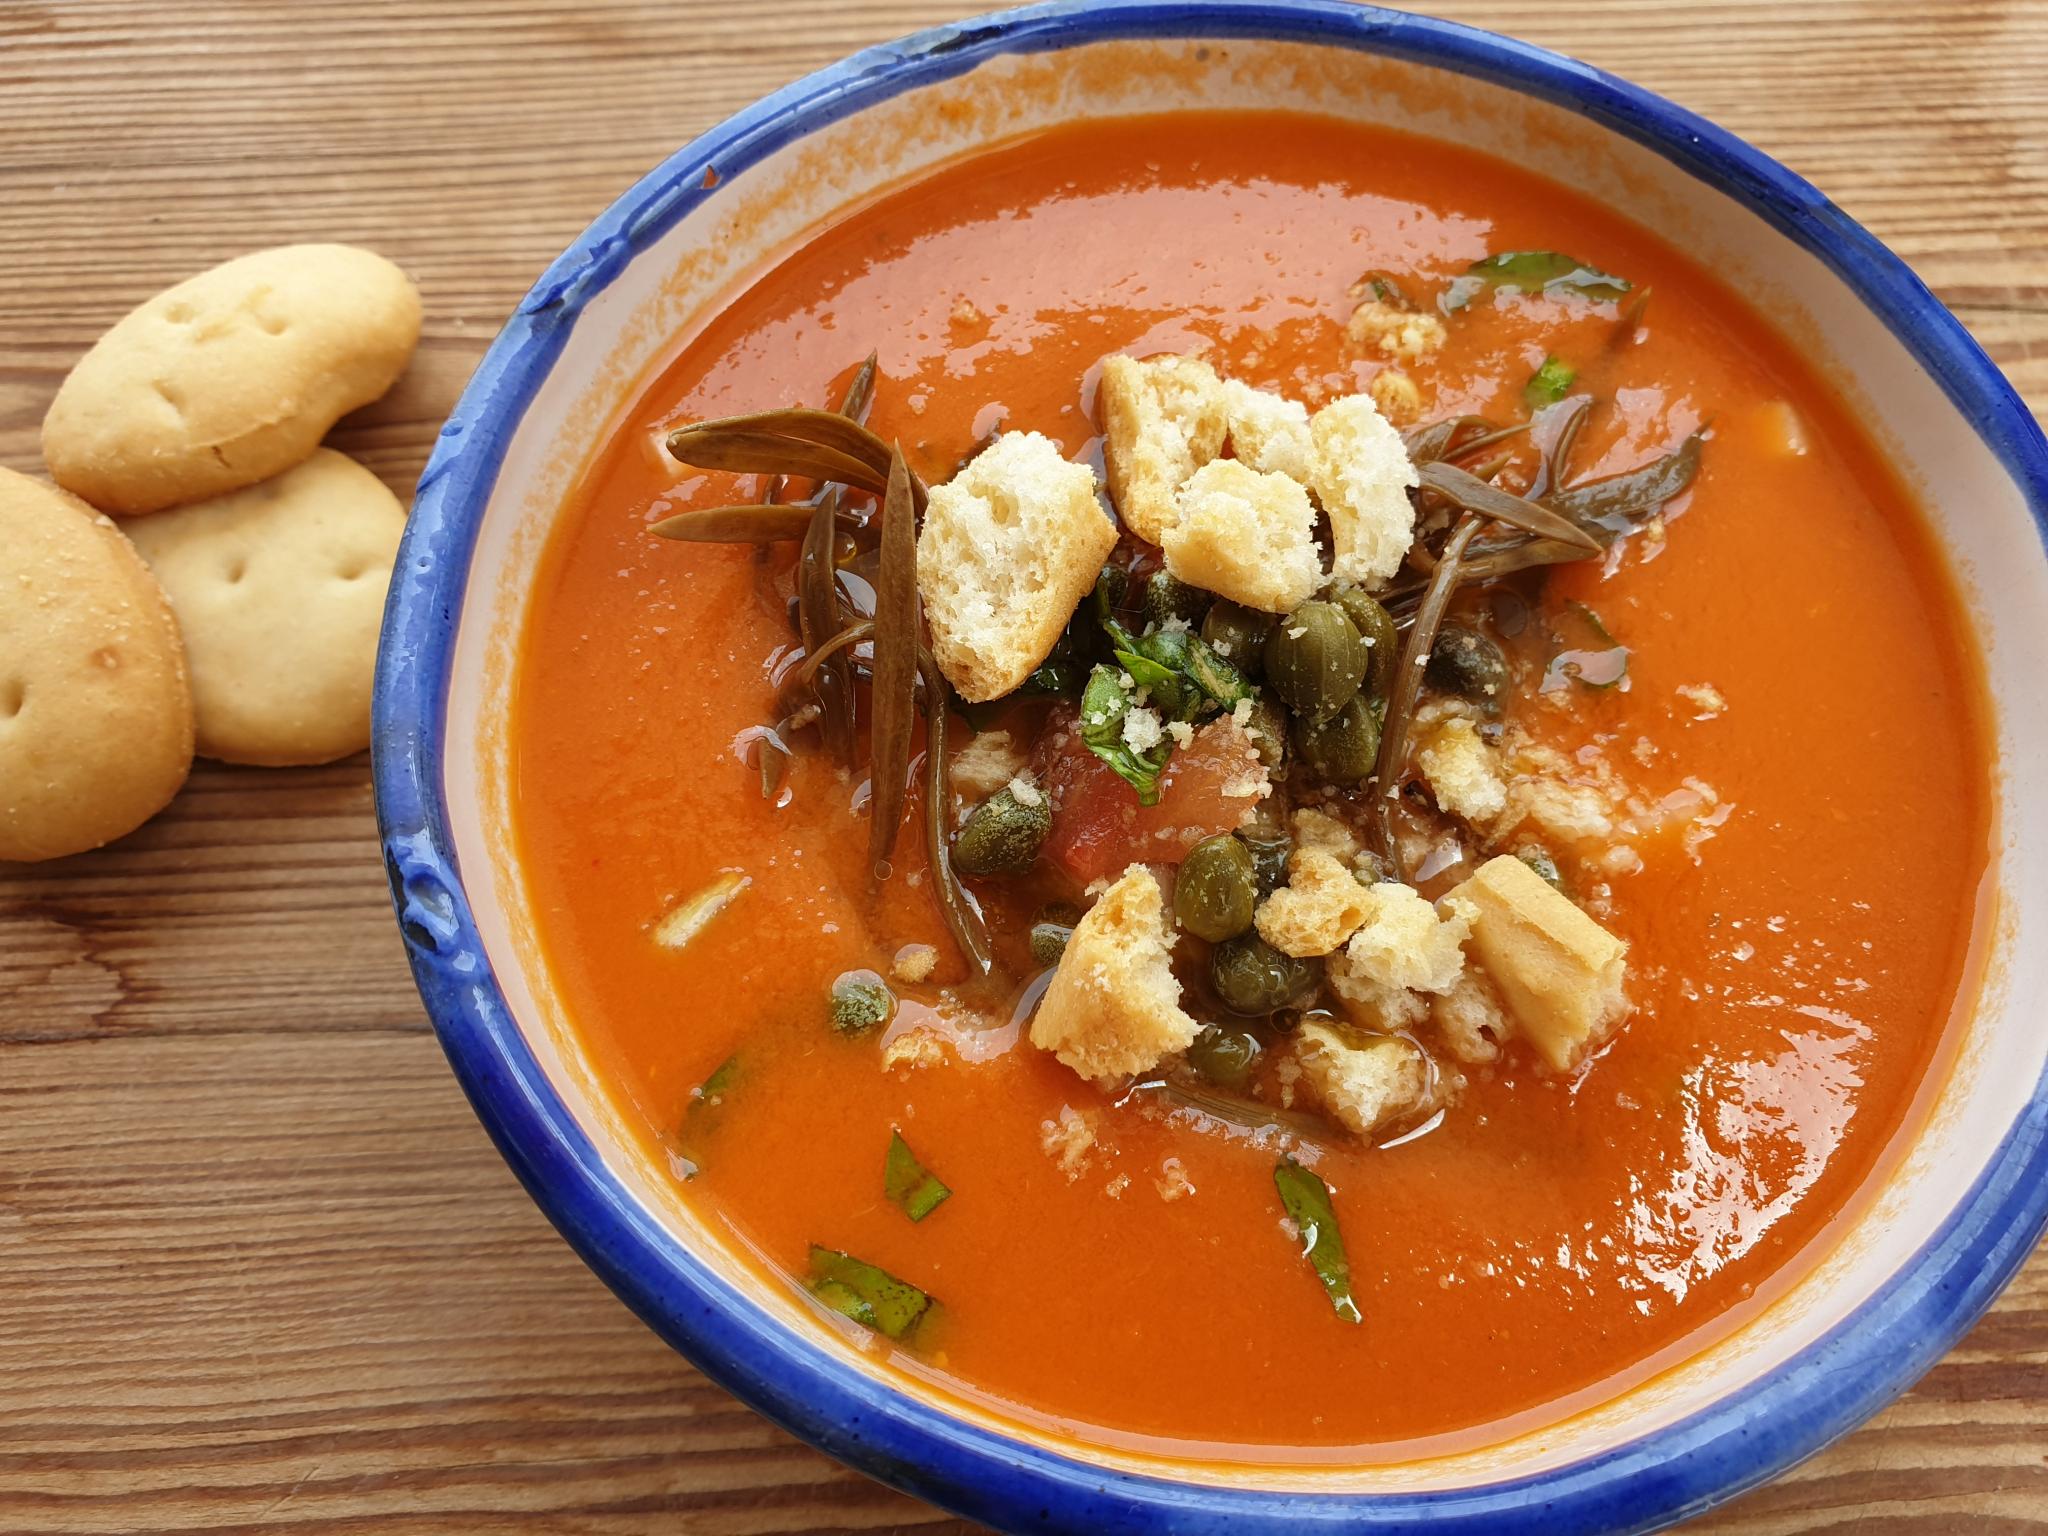 Gazpacho andaluz is Spain’s greatest cold soup